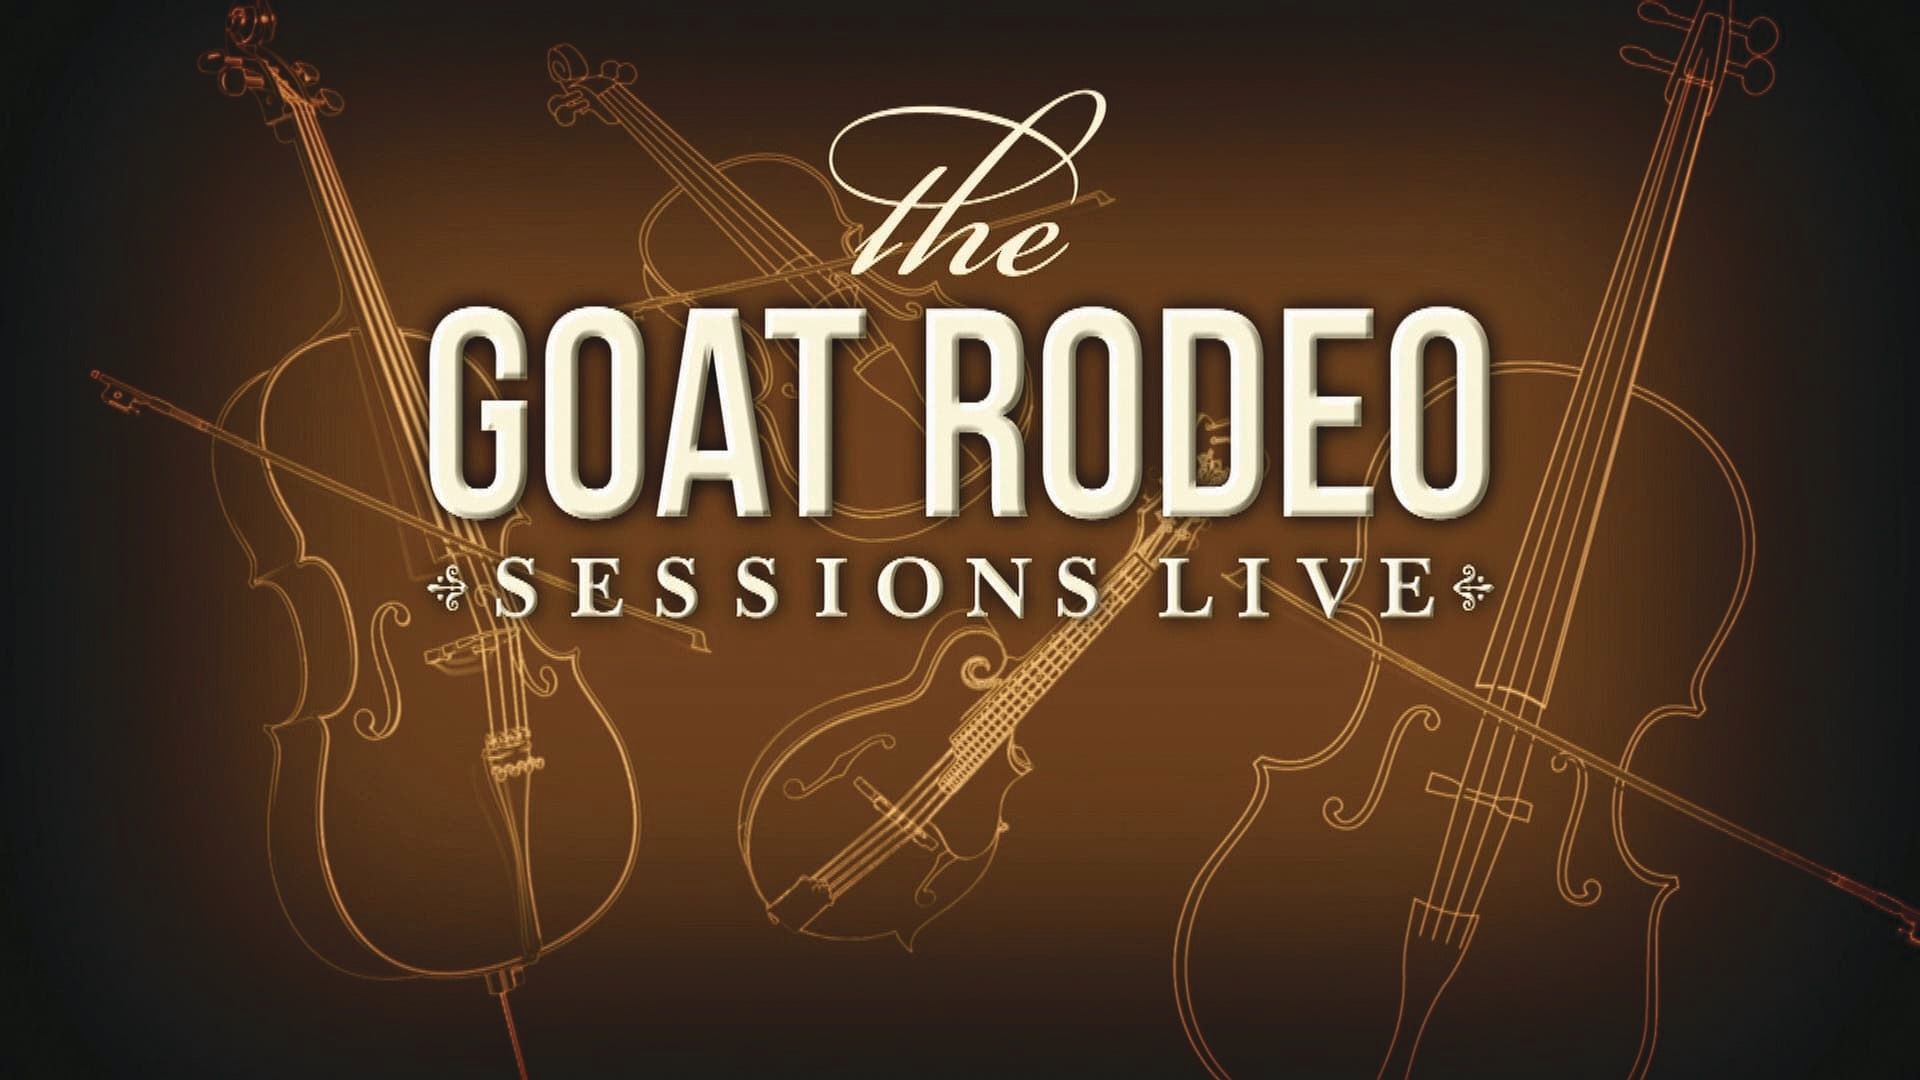 The Goat Rodeo Sessions Live background